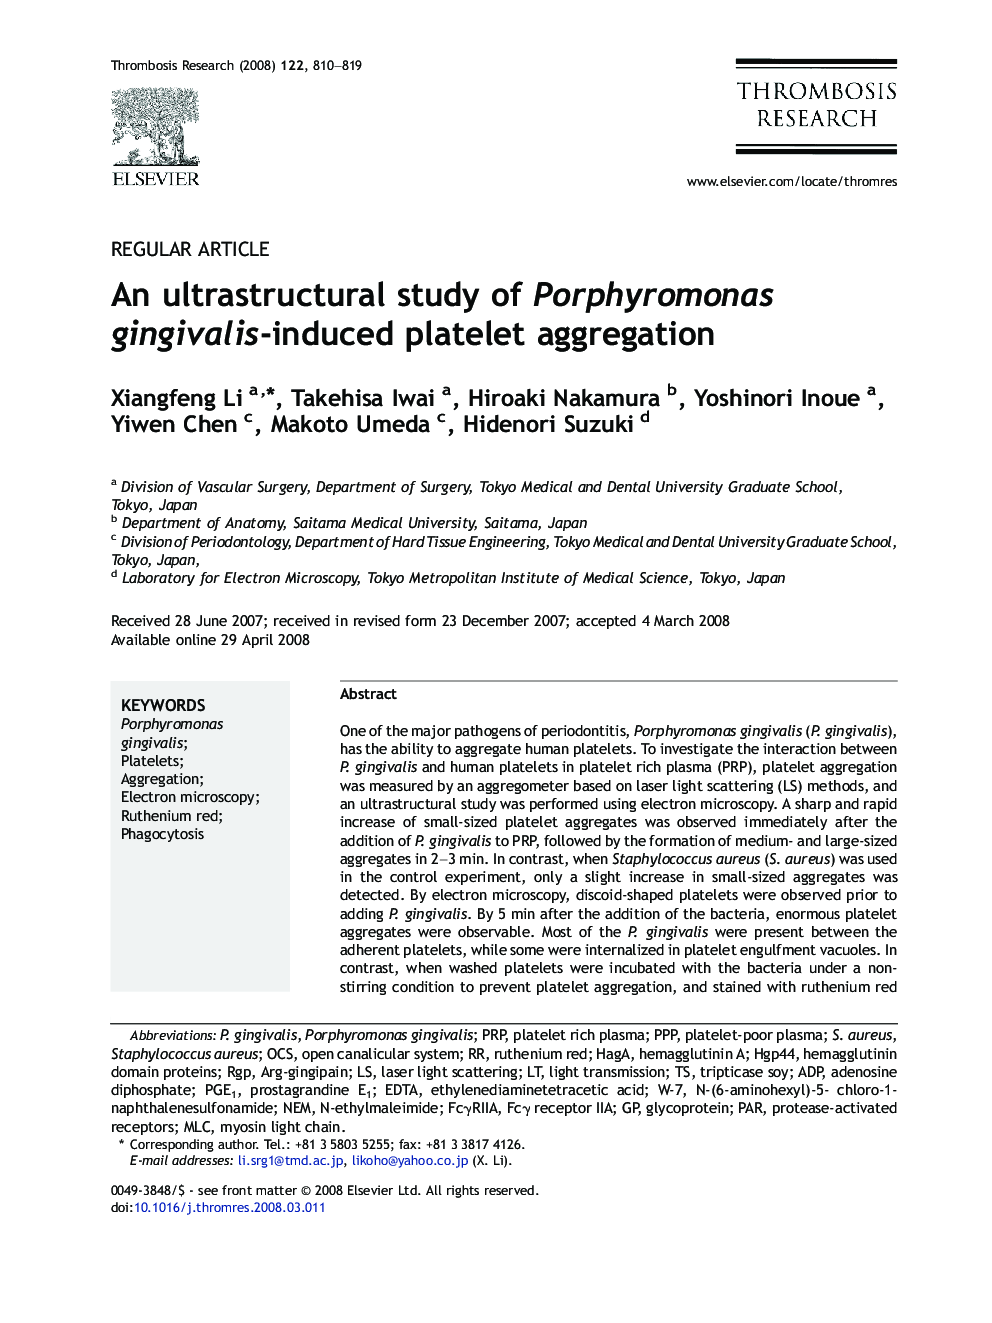 An ultrastructural study of Porphyromonas gingivalis-induced platelet aggregation